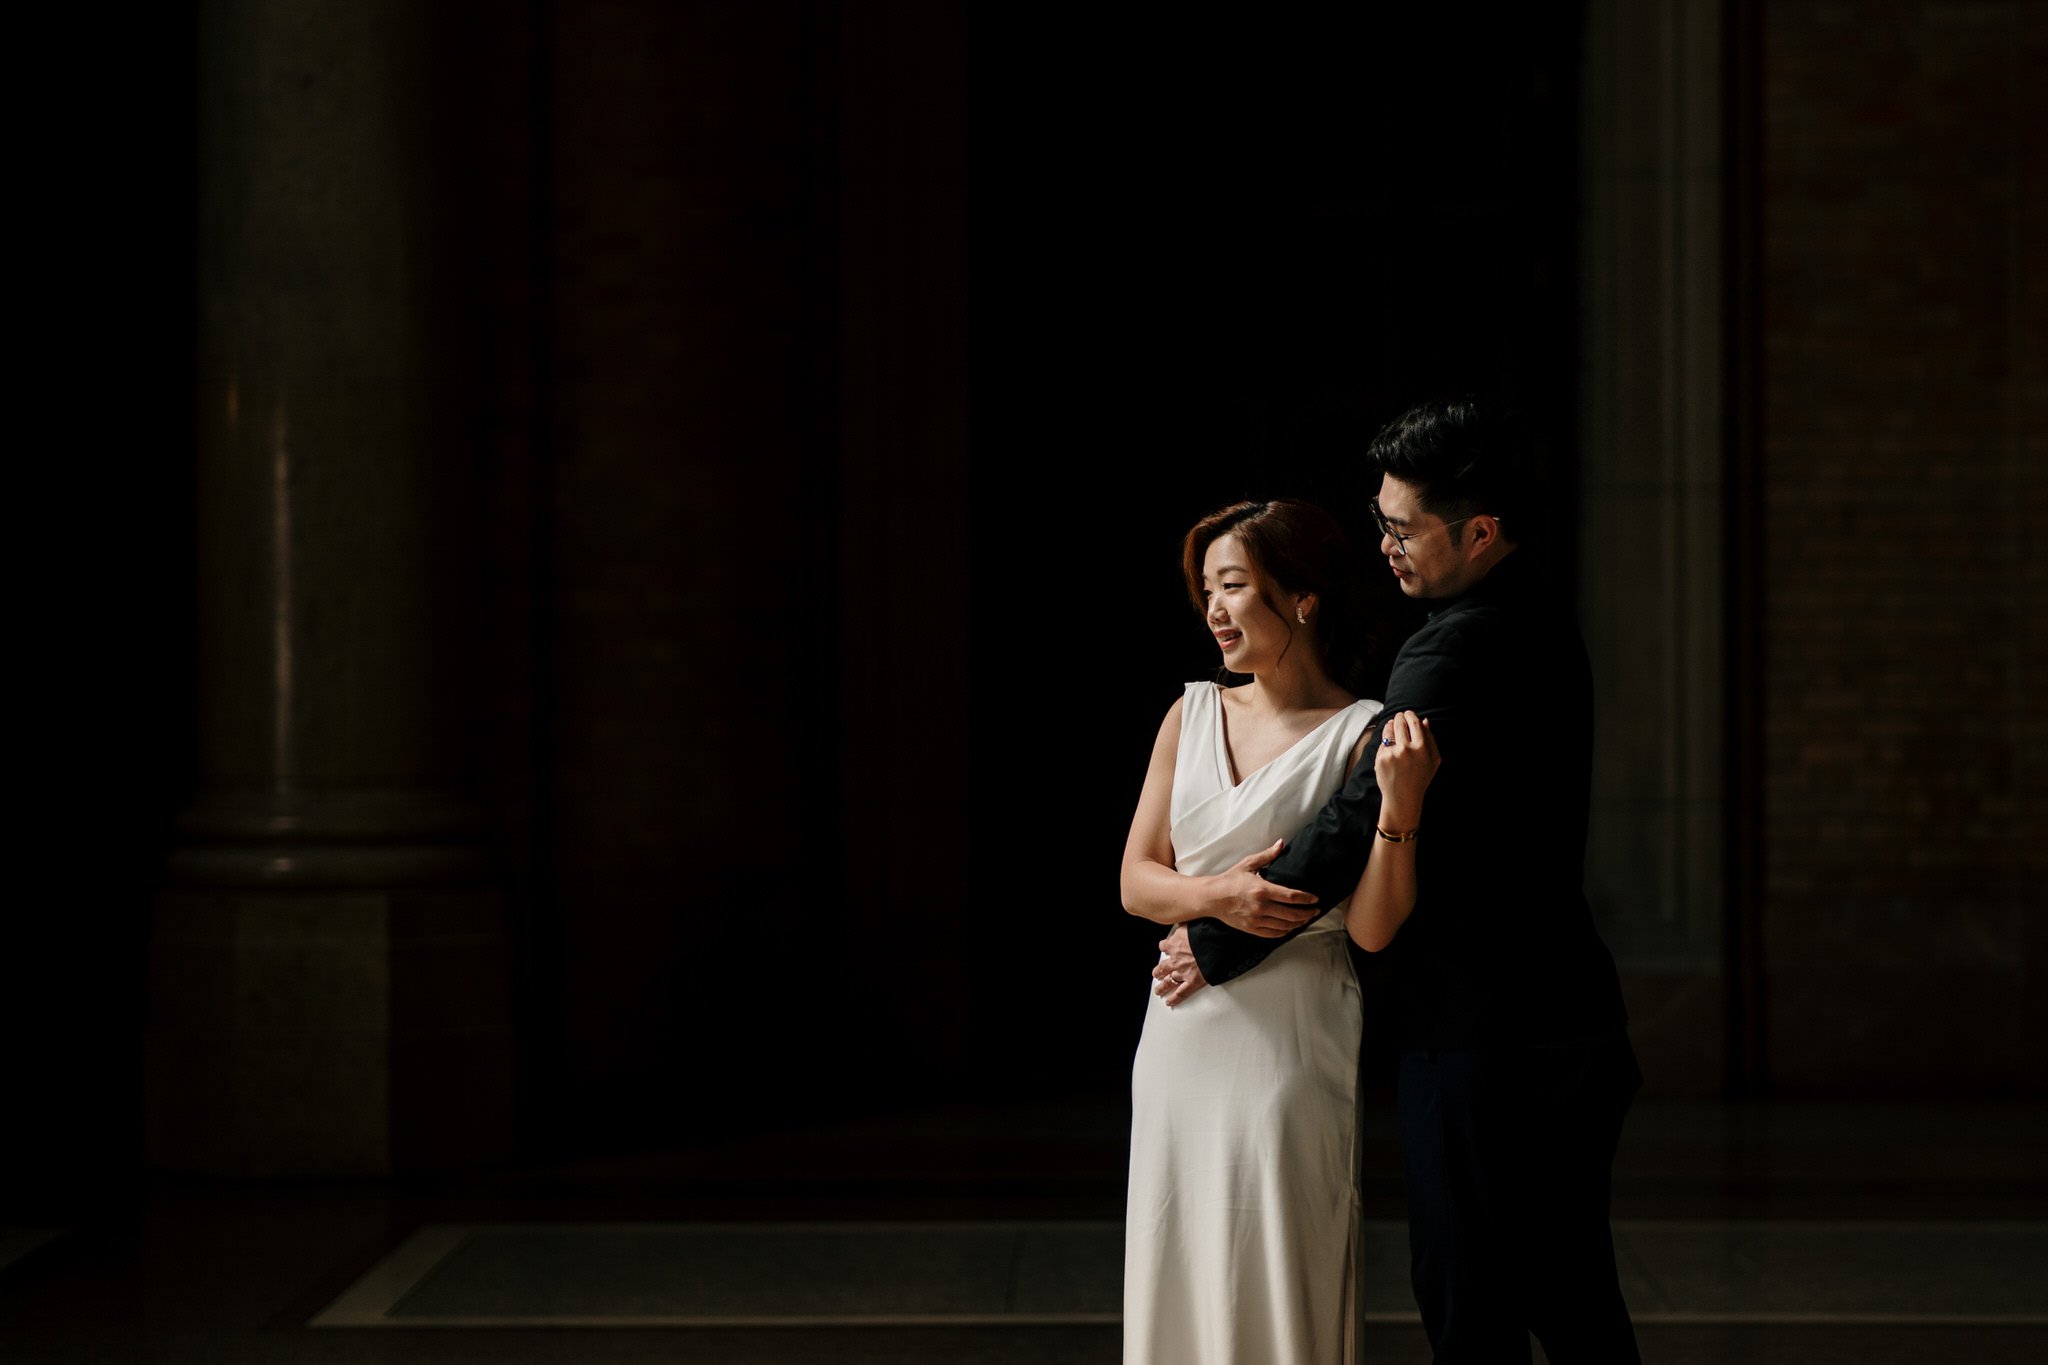 auckland-wedding-photographer-videographer-story-by-koo-koo's-jewelry-dear-white-productions-old-train-station-new-zealand-moody-historical-pre-wedding-engagement-photo (32).JPG